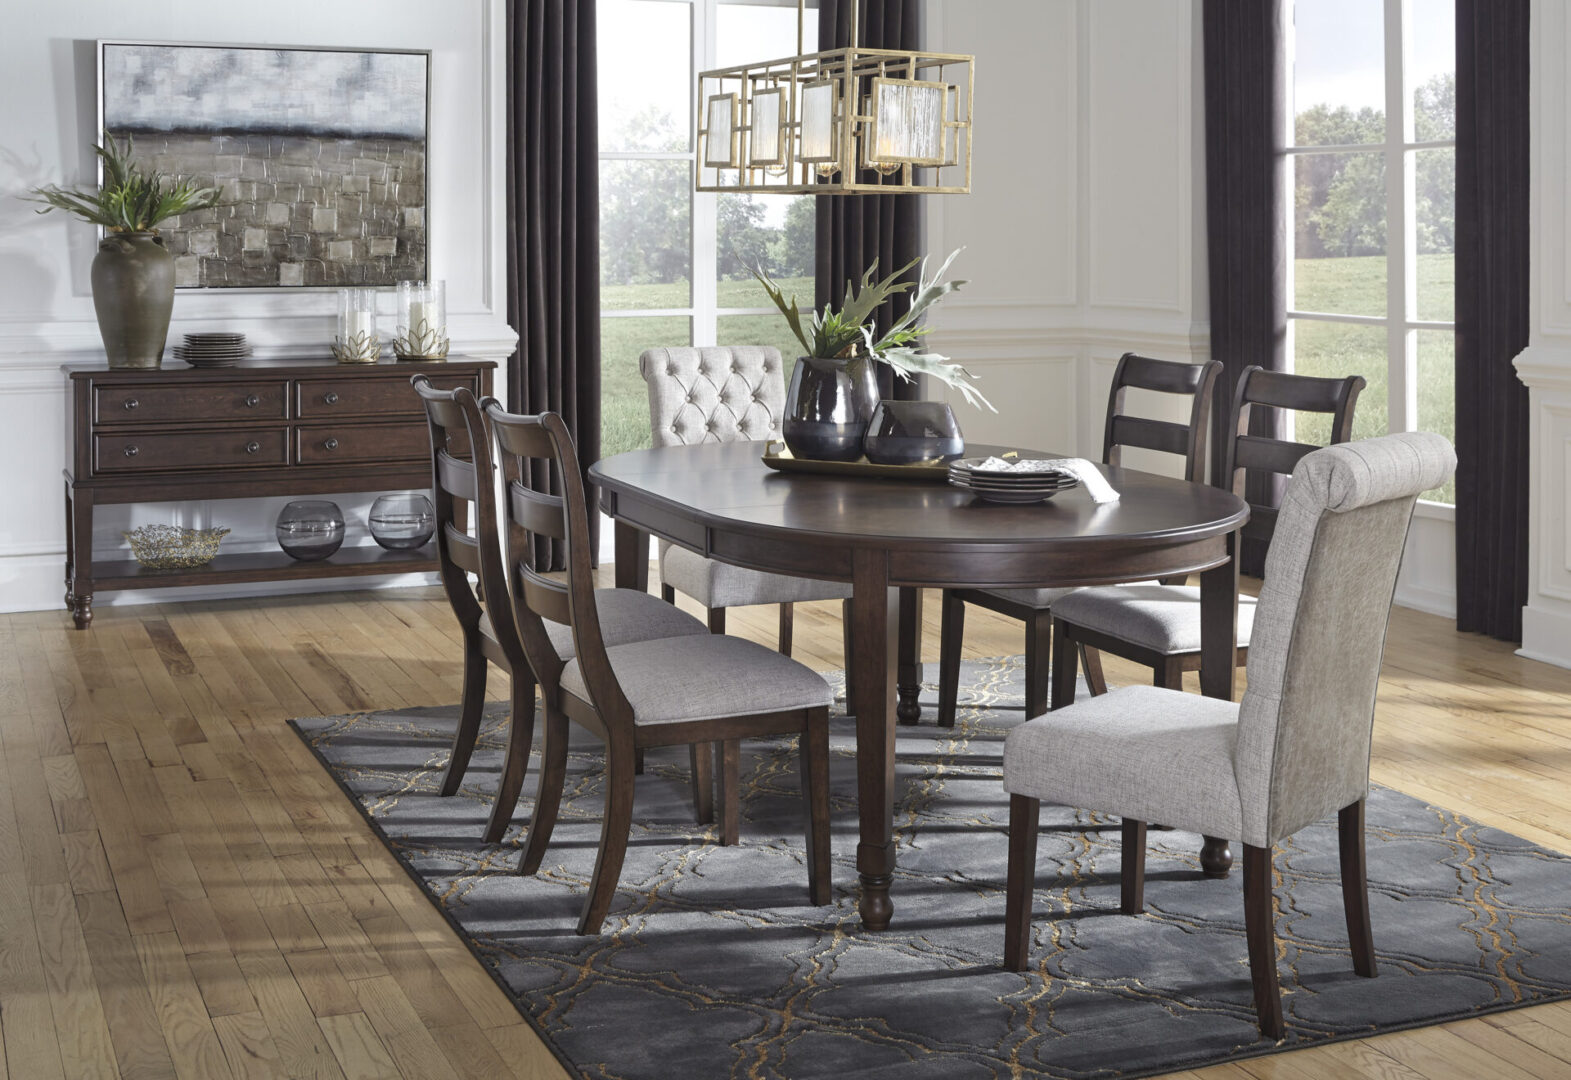 A dining room table and chairs in the center of a living room.